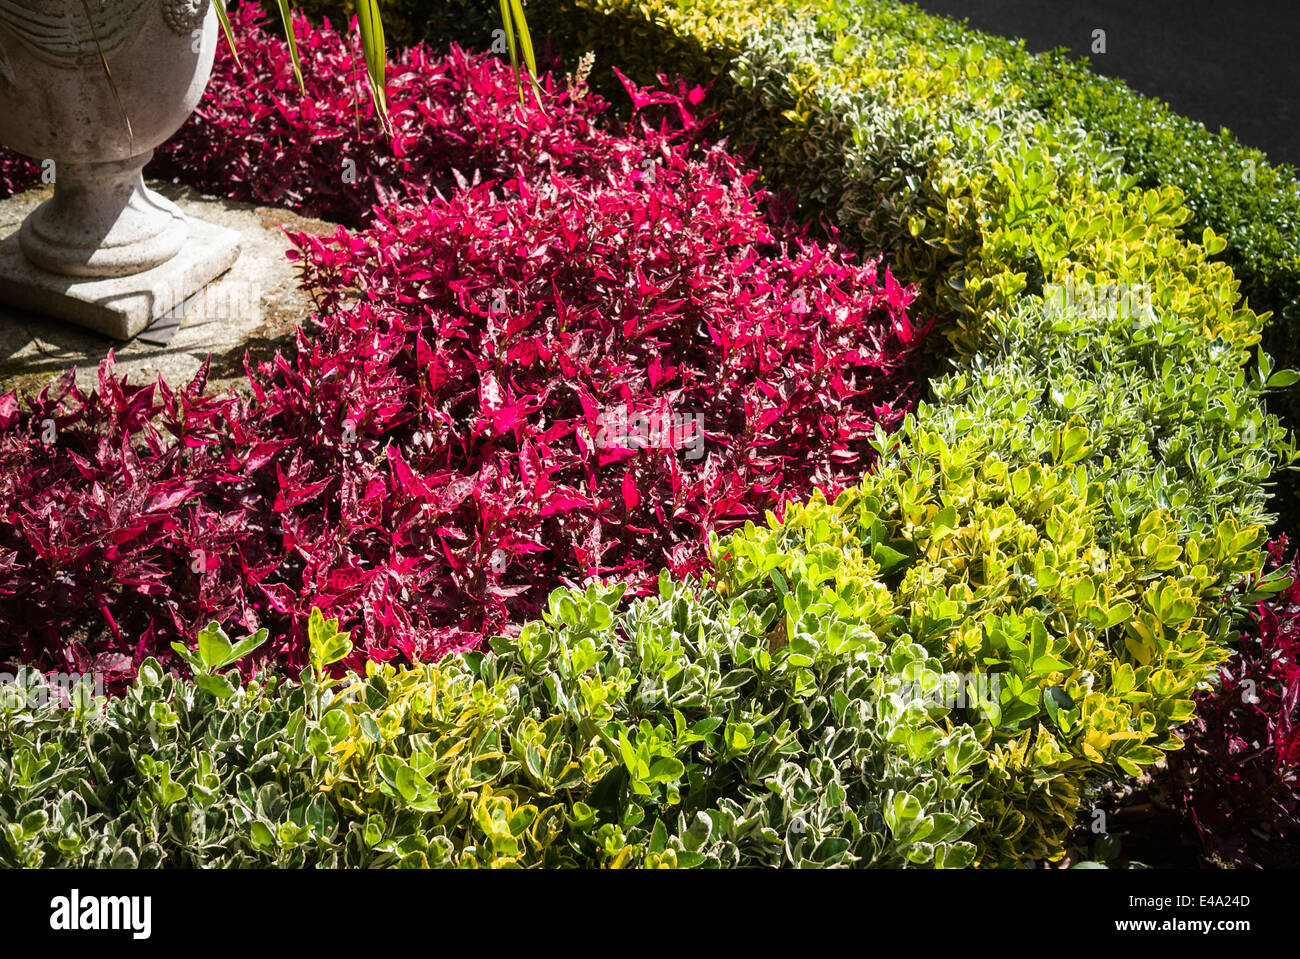 Segment of concentric bedding feature in a private Guernsey garden Stock Photo